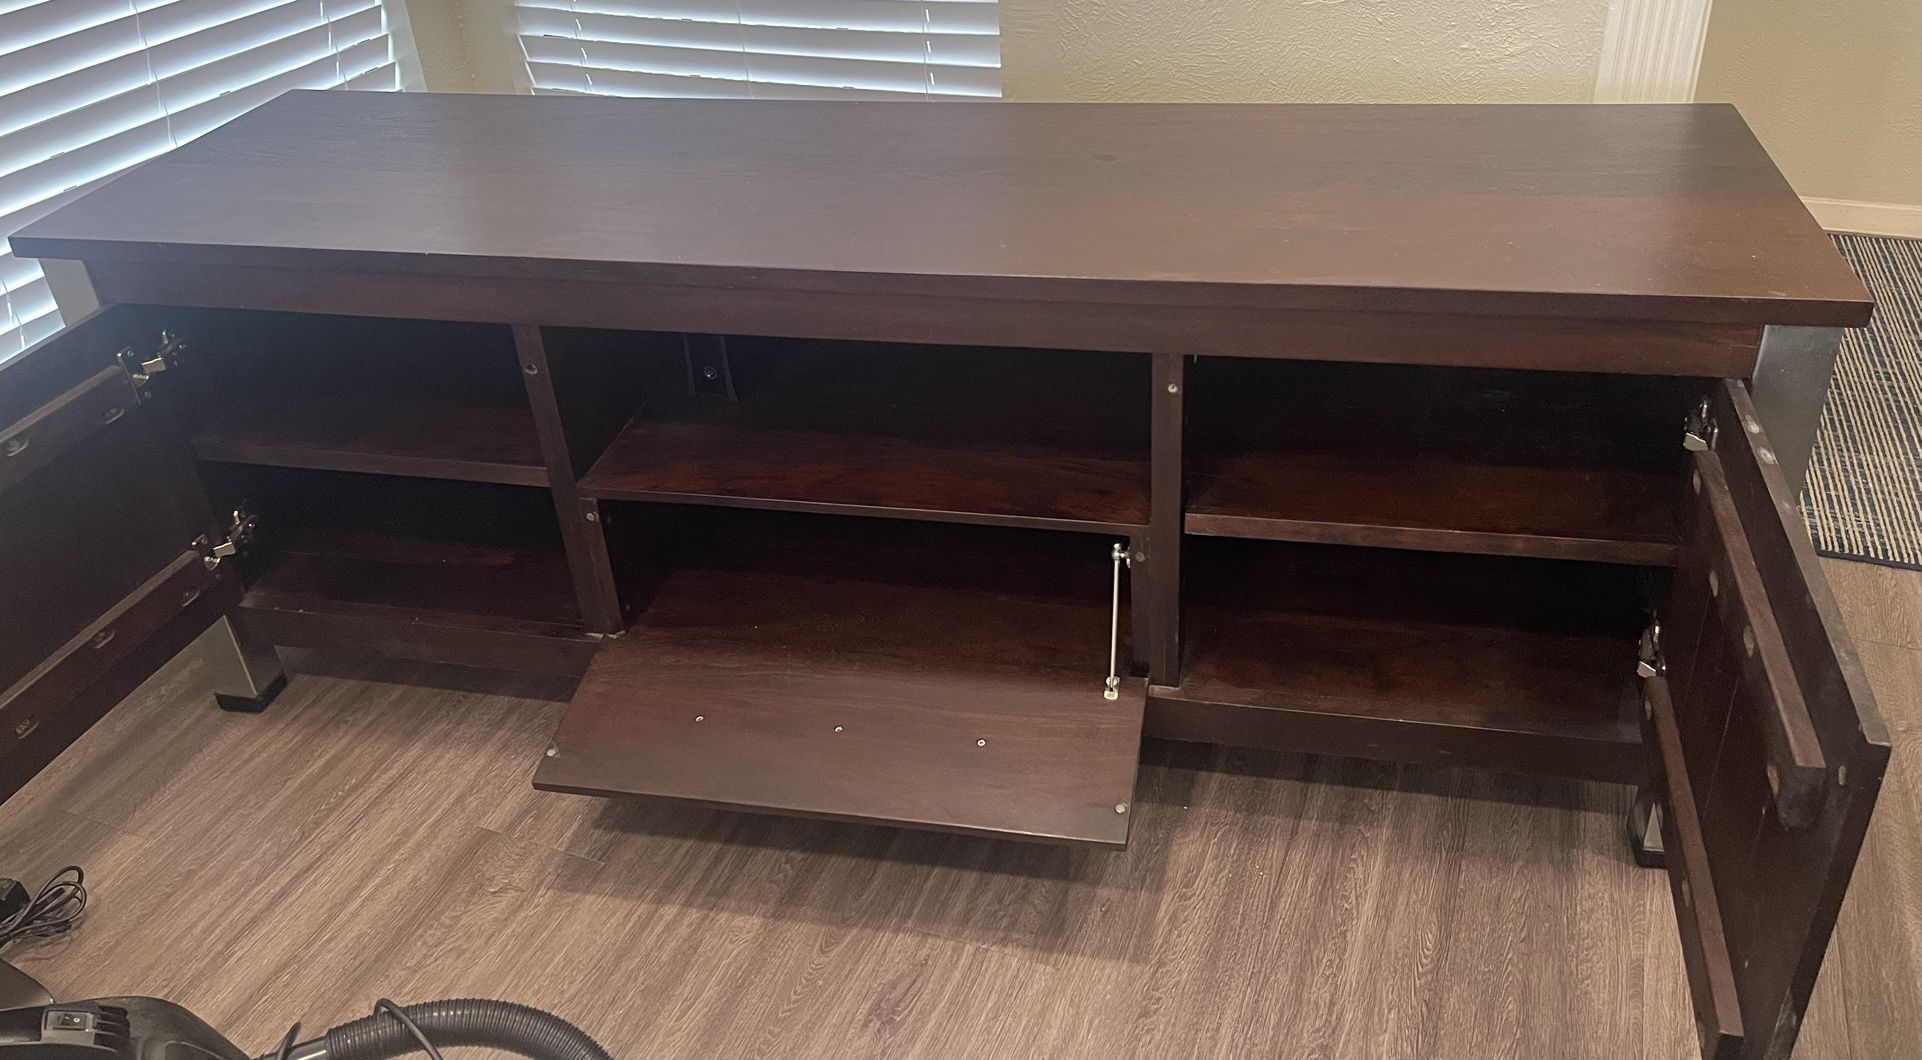 Solid Wood TV Stand (Four Hands) $200